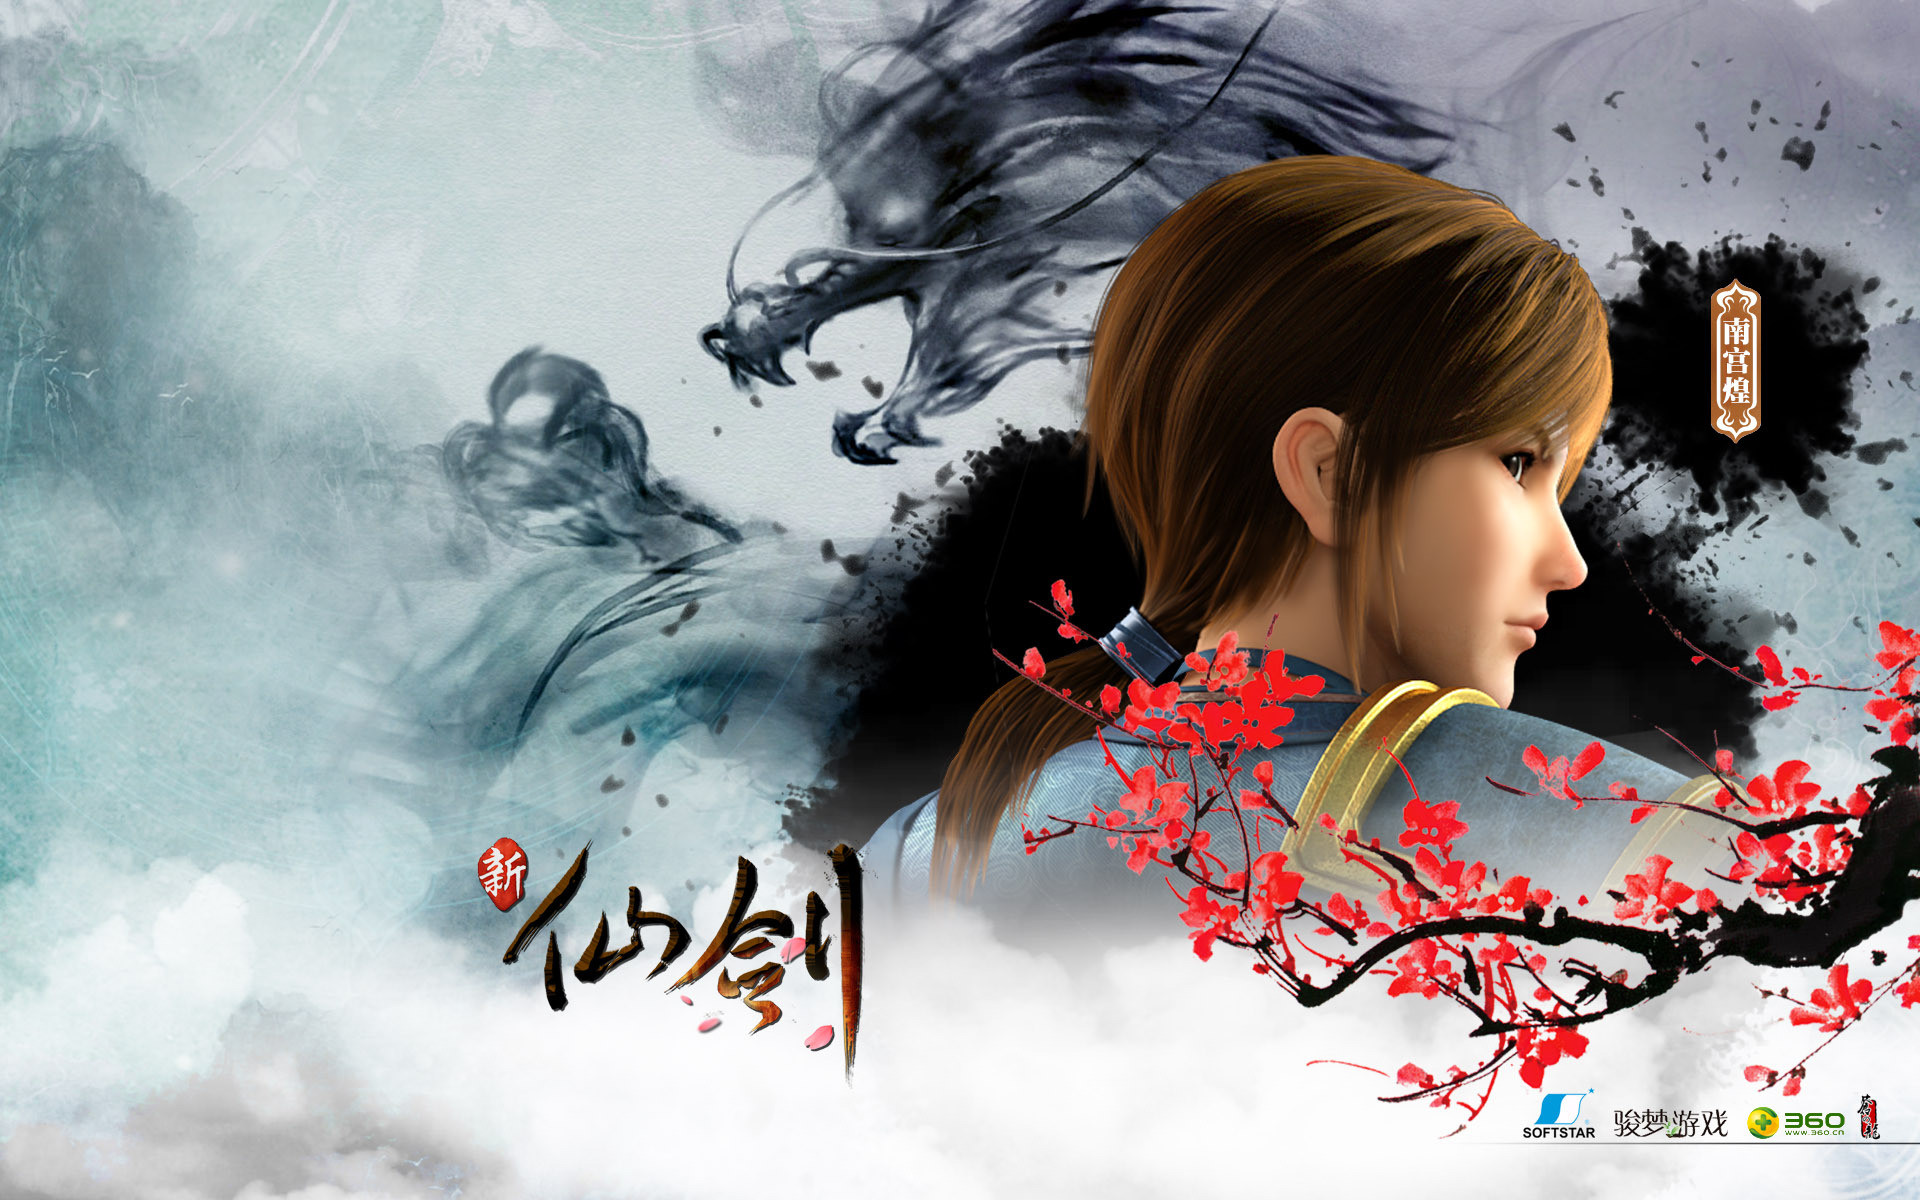 1920x1200 The Legend of Sword and Fairy Chinese Paladin fantasy wuxia (14) wallpaper  |  | 215731 | WallpaperUP